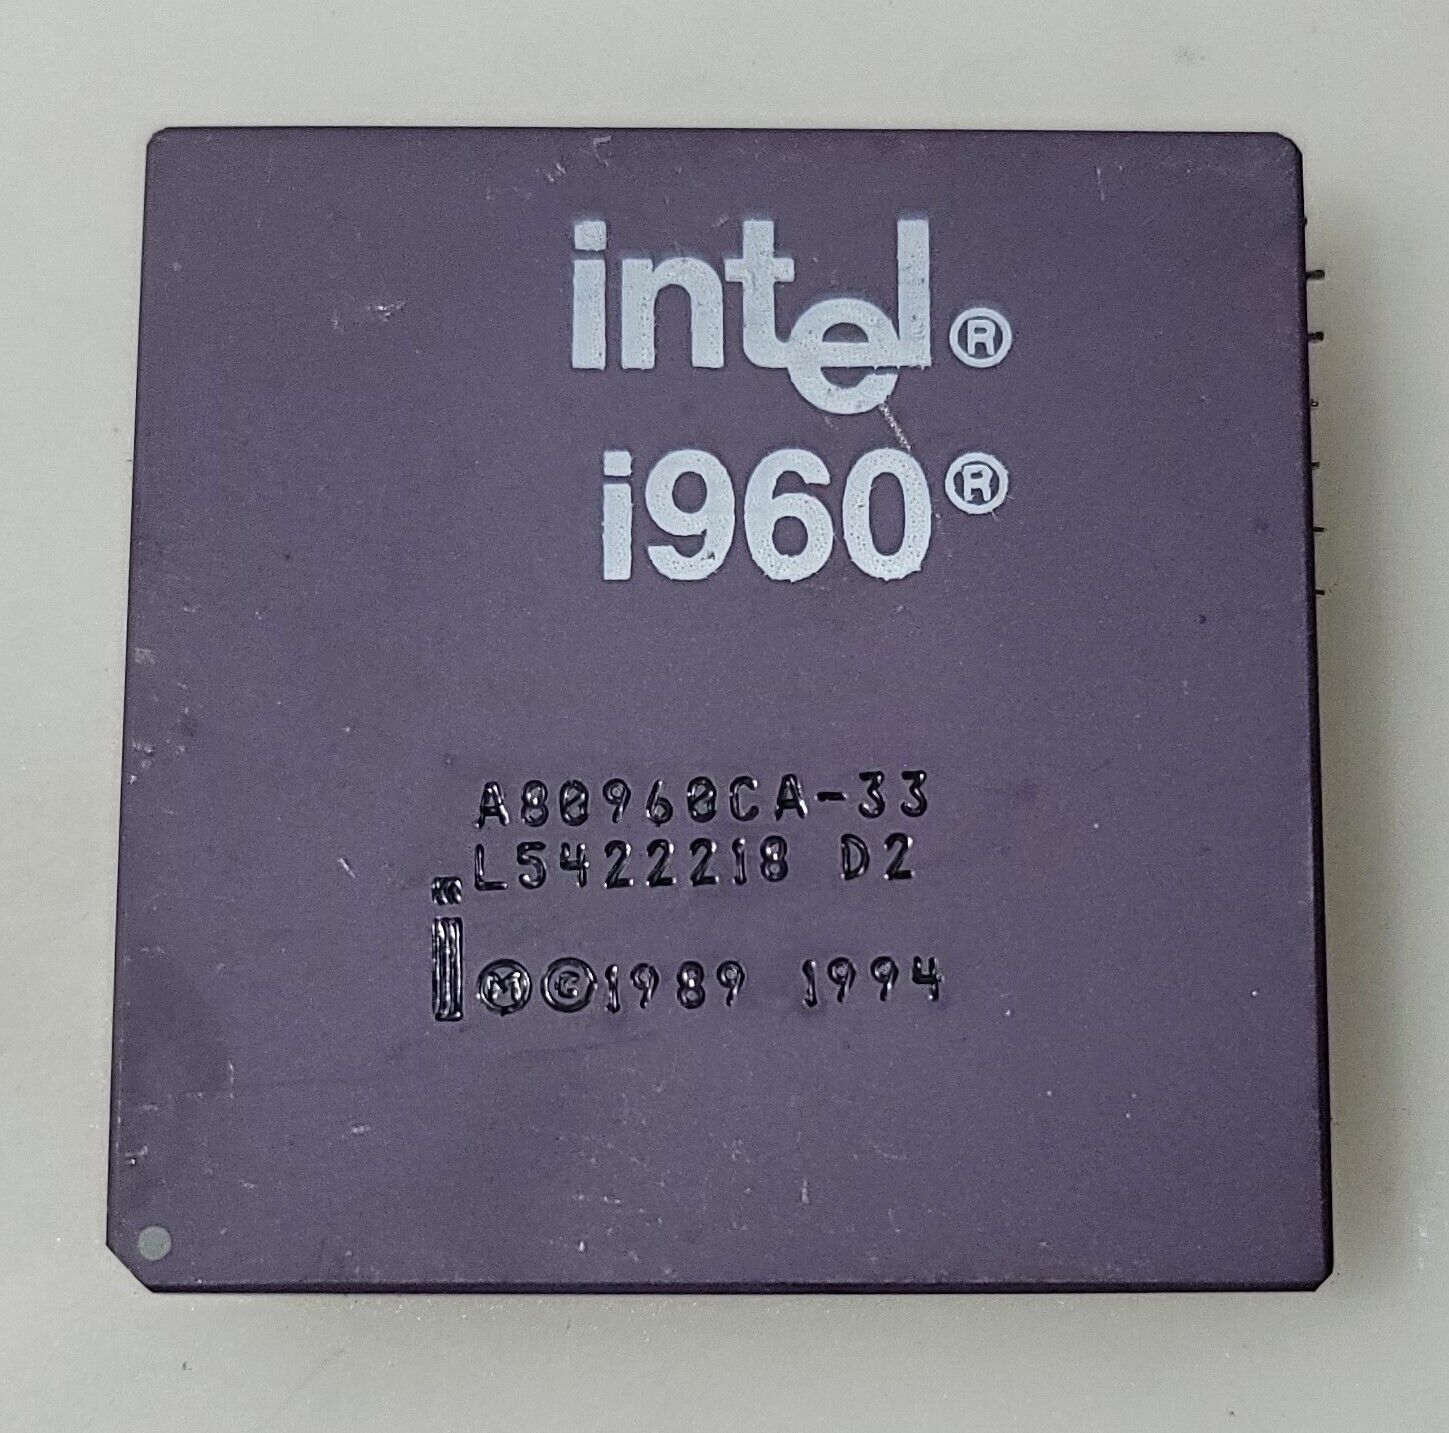 Vintage Rare Intel i960 A80960CA33 Processor Collection or Gold Recovery